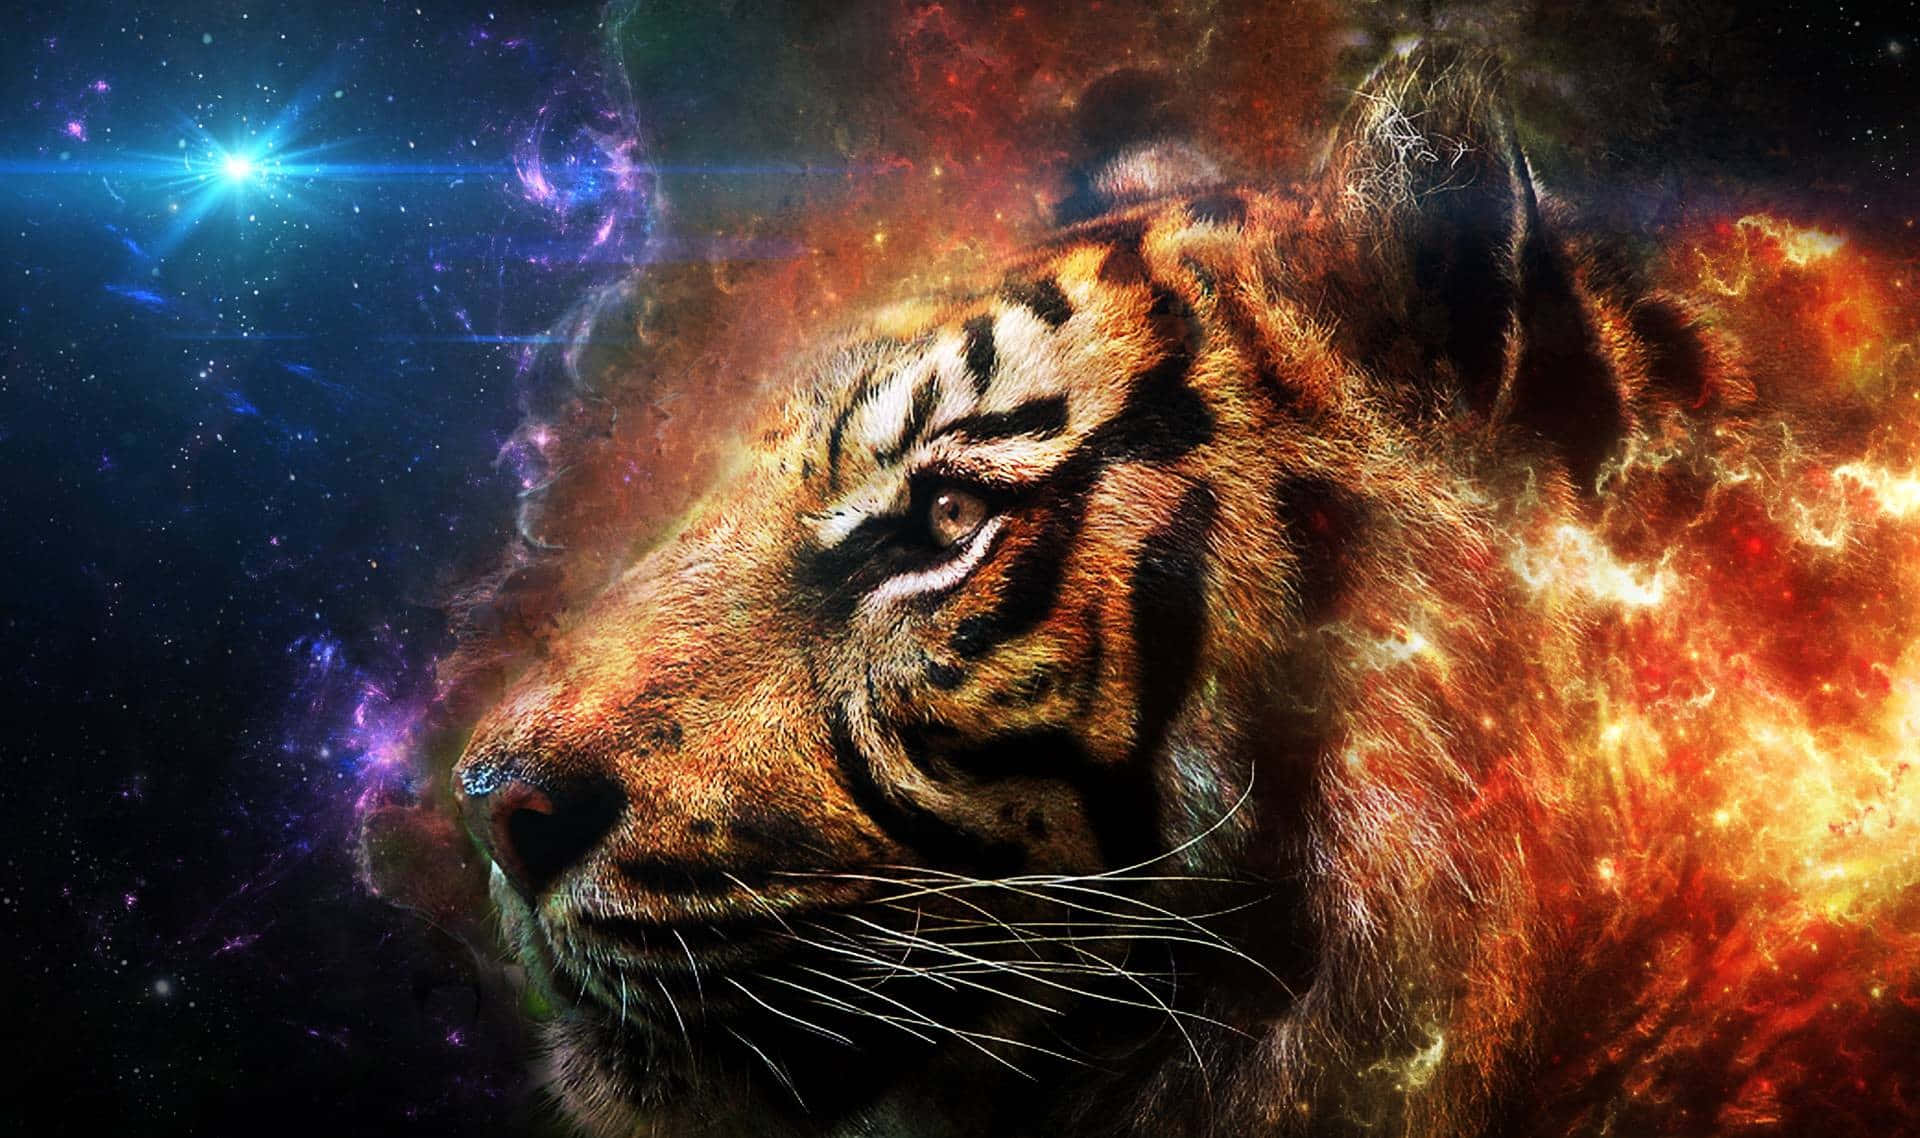 A Royal Tiger Roars in the Galactic Sky Wallpaper